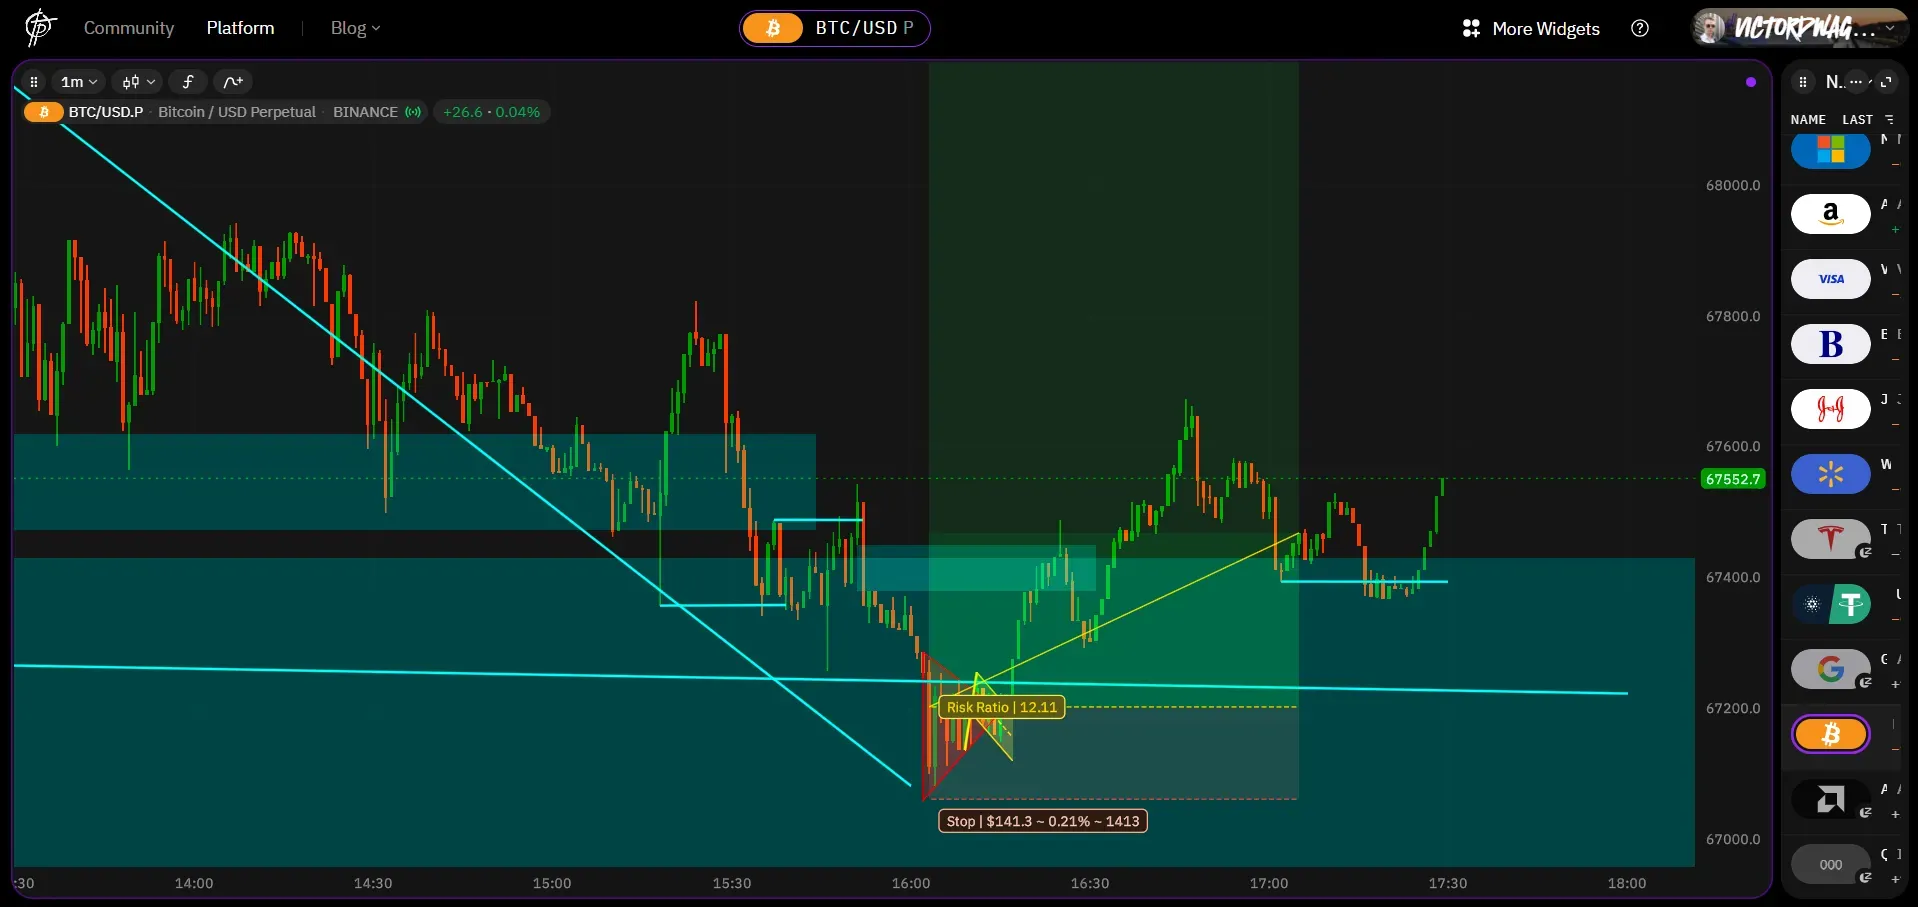 The Long Position tools is to track the progress of the Trade and get information about the loss, win, RR and much more